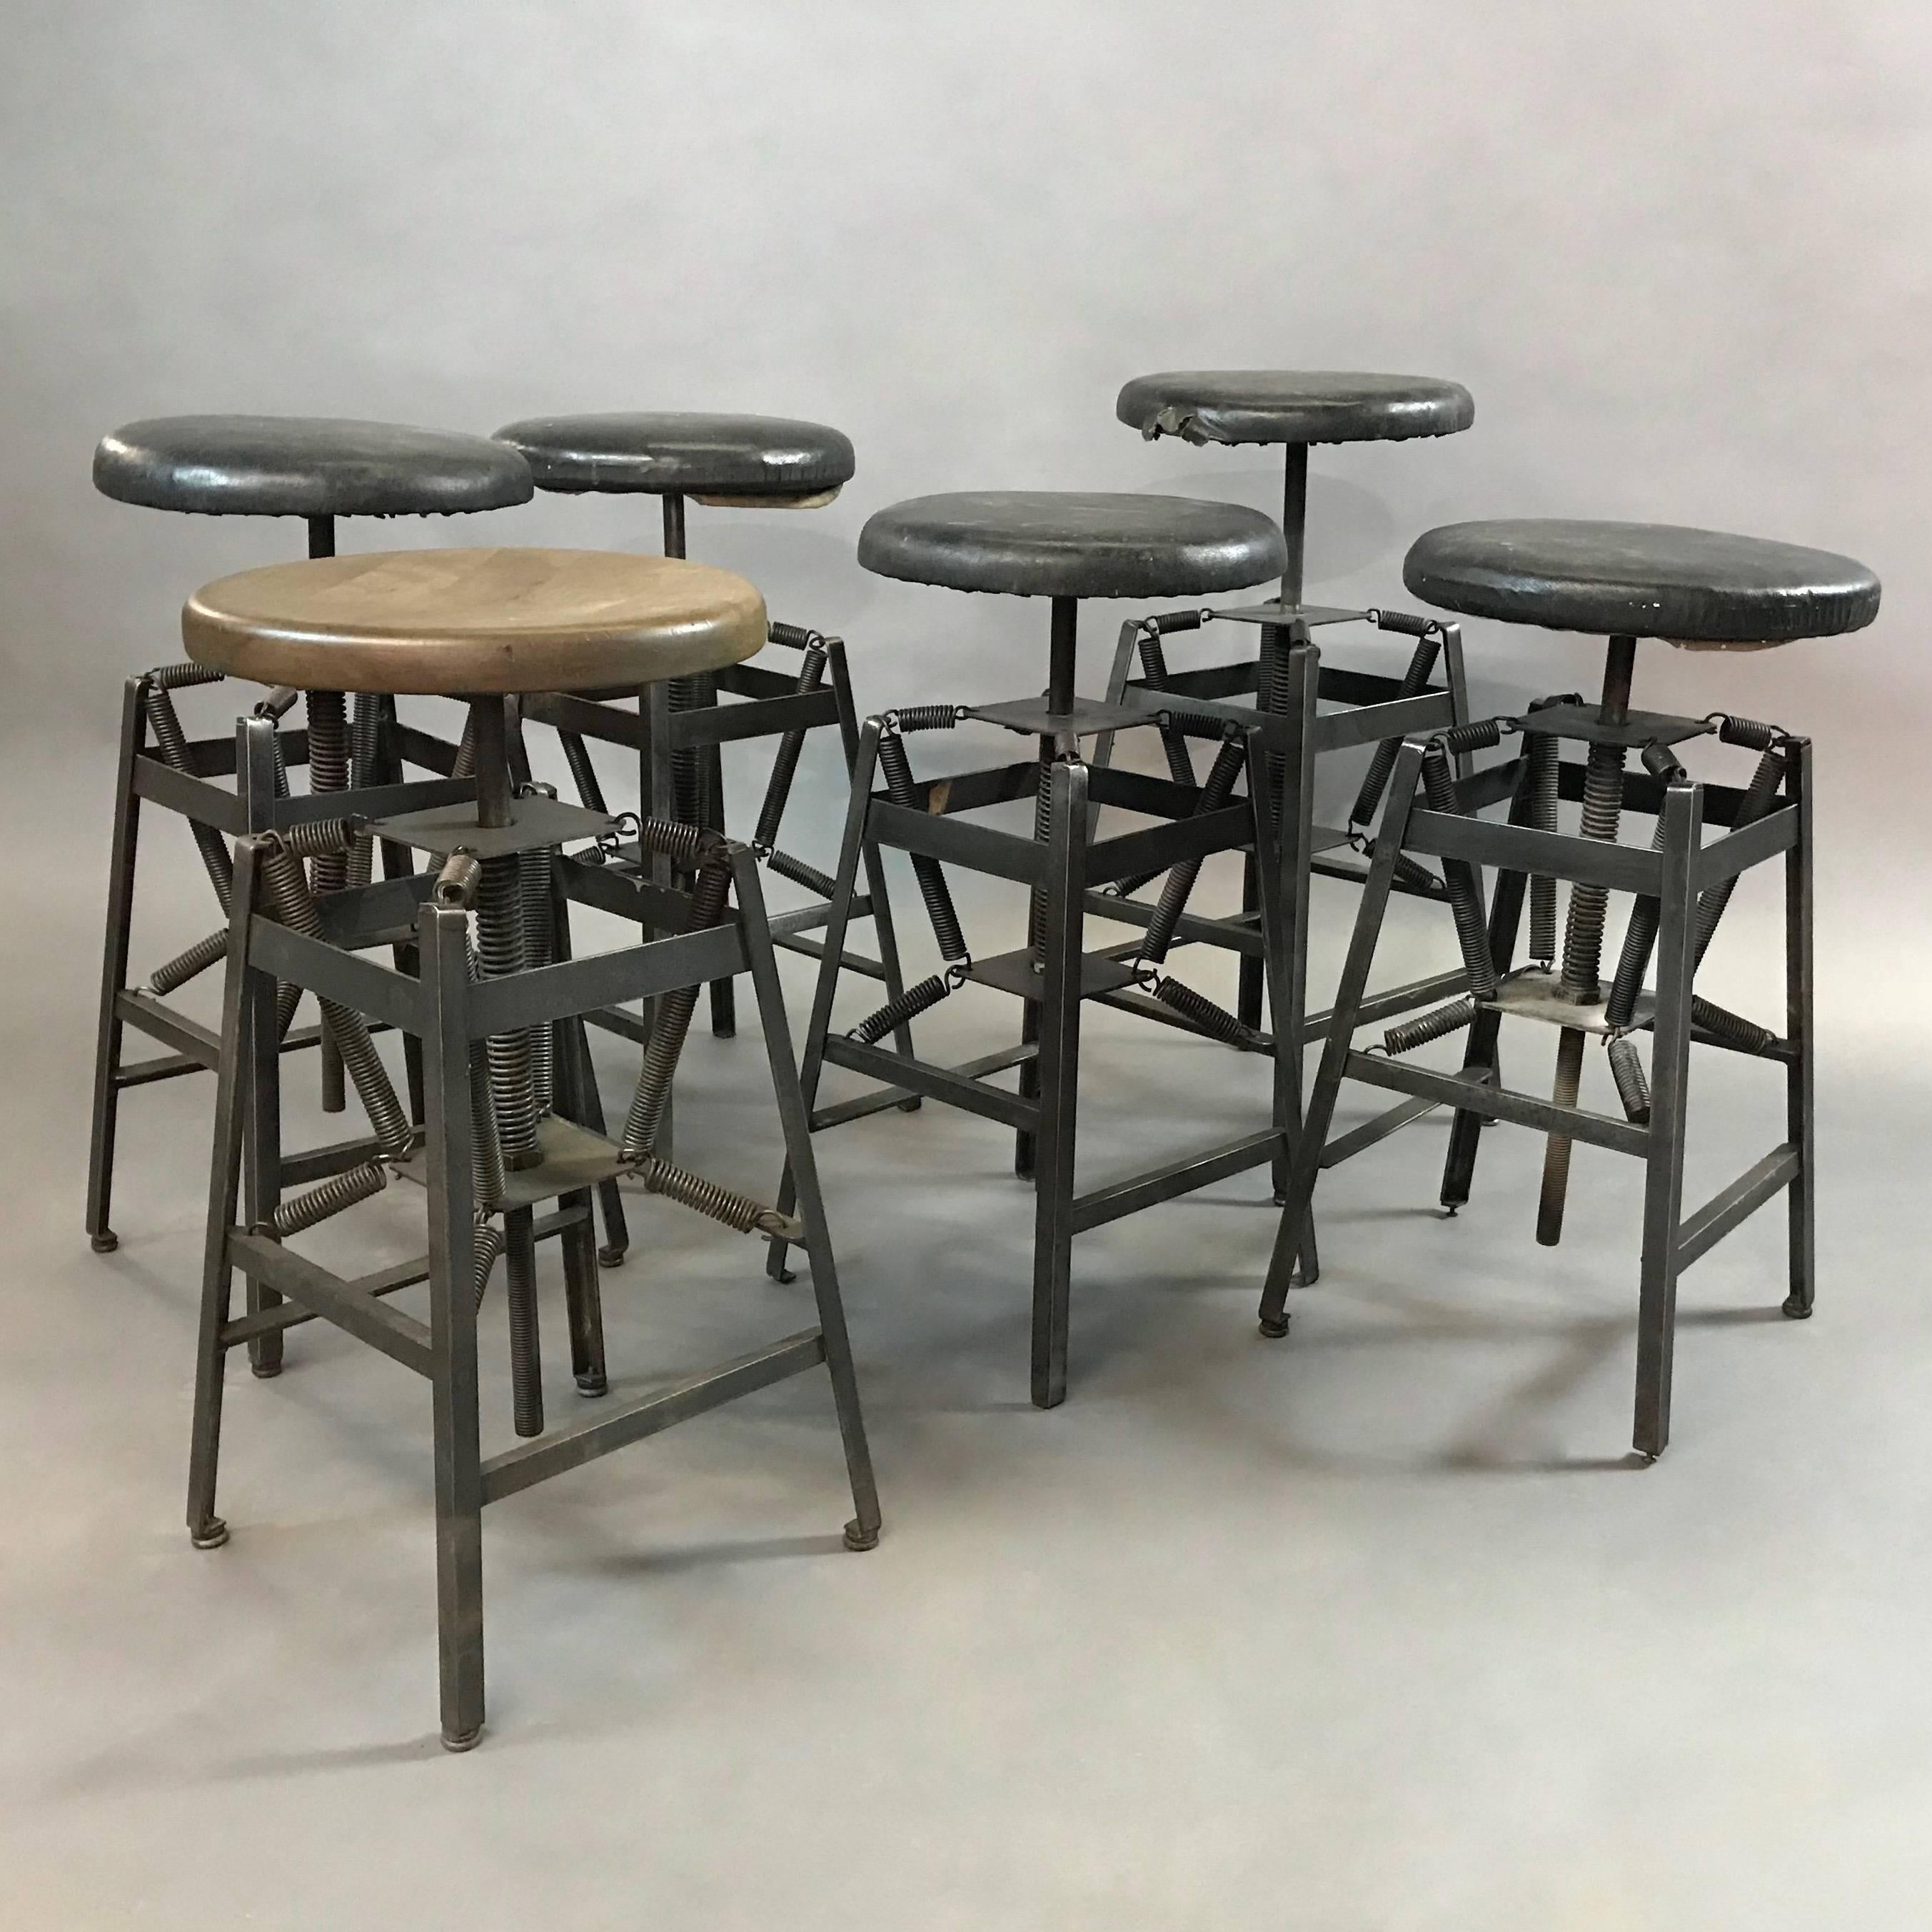 Industrial drafting stool designed by Charles E. Miller for American Cabinet Co. features an adjustable height, steel, spring suspension base with original black vinyl seats. The seats can be re-upholstered or changed to wood. Seat diameter and foot